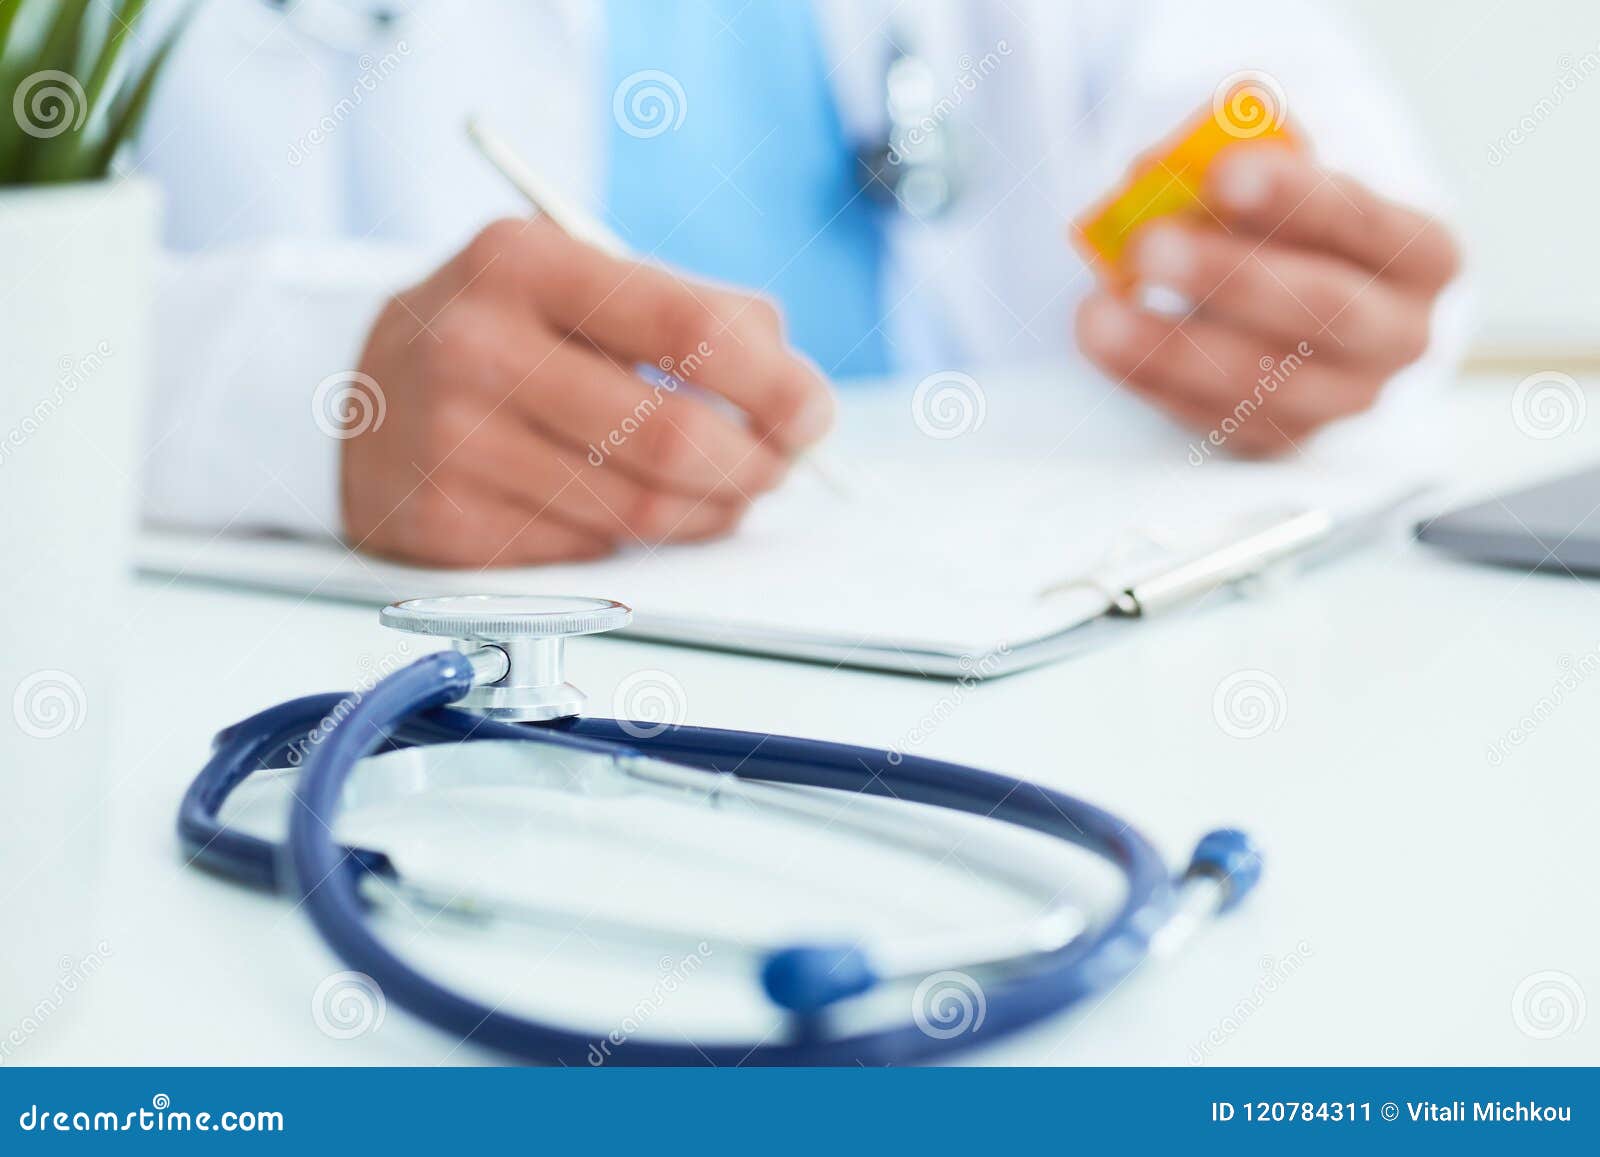 male physician medicine doctor or pharmacist sitting at worktable, holding jar or bottle of pills in hand and writing